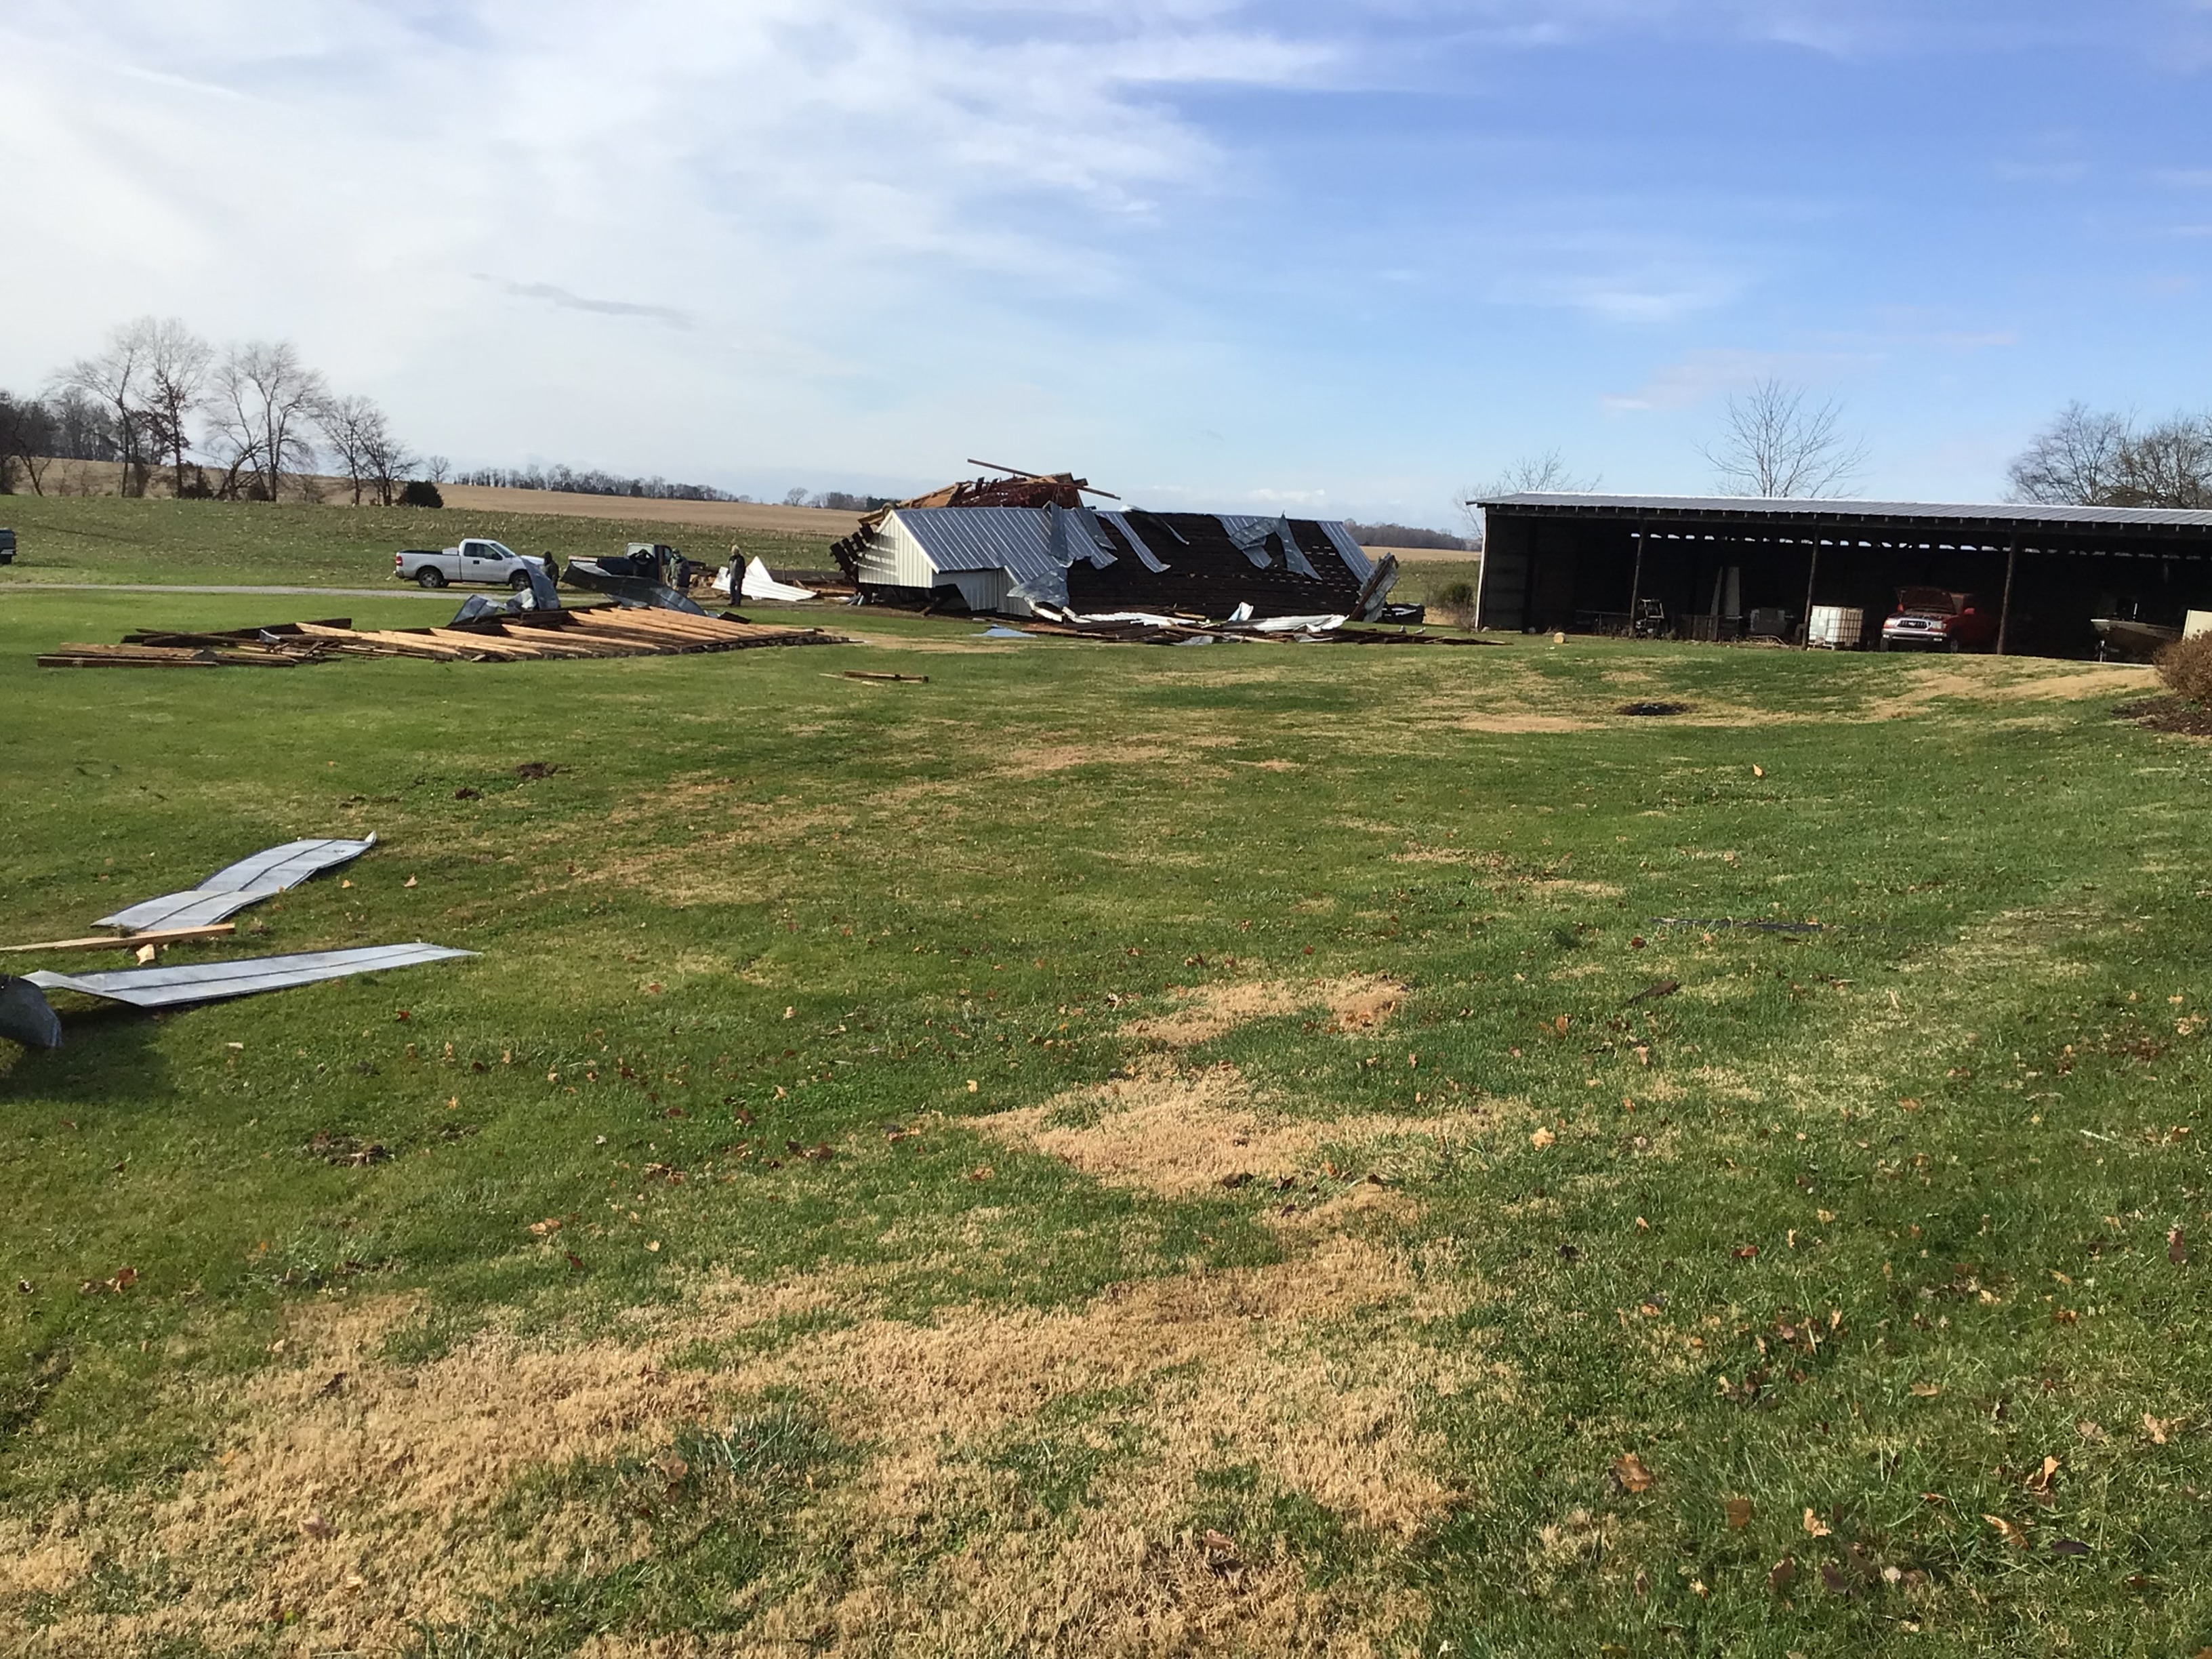 Photo of damage in Todd County, KY